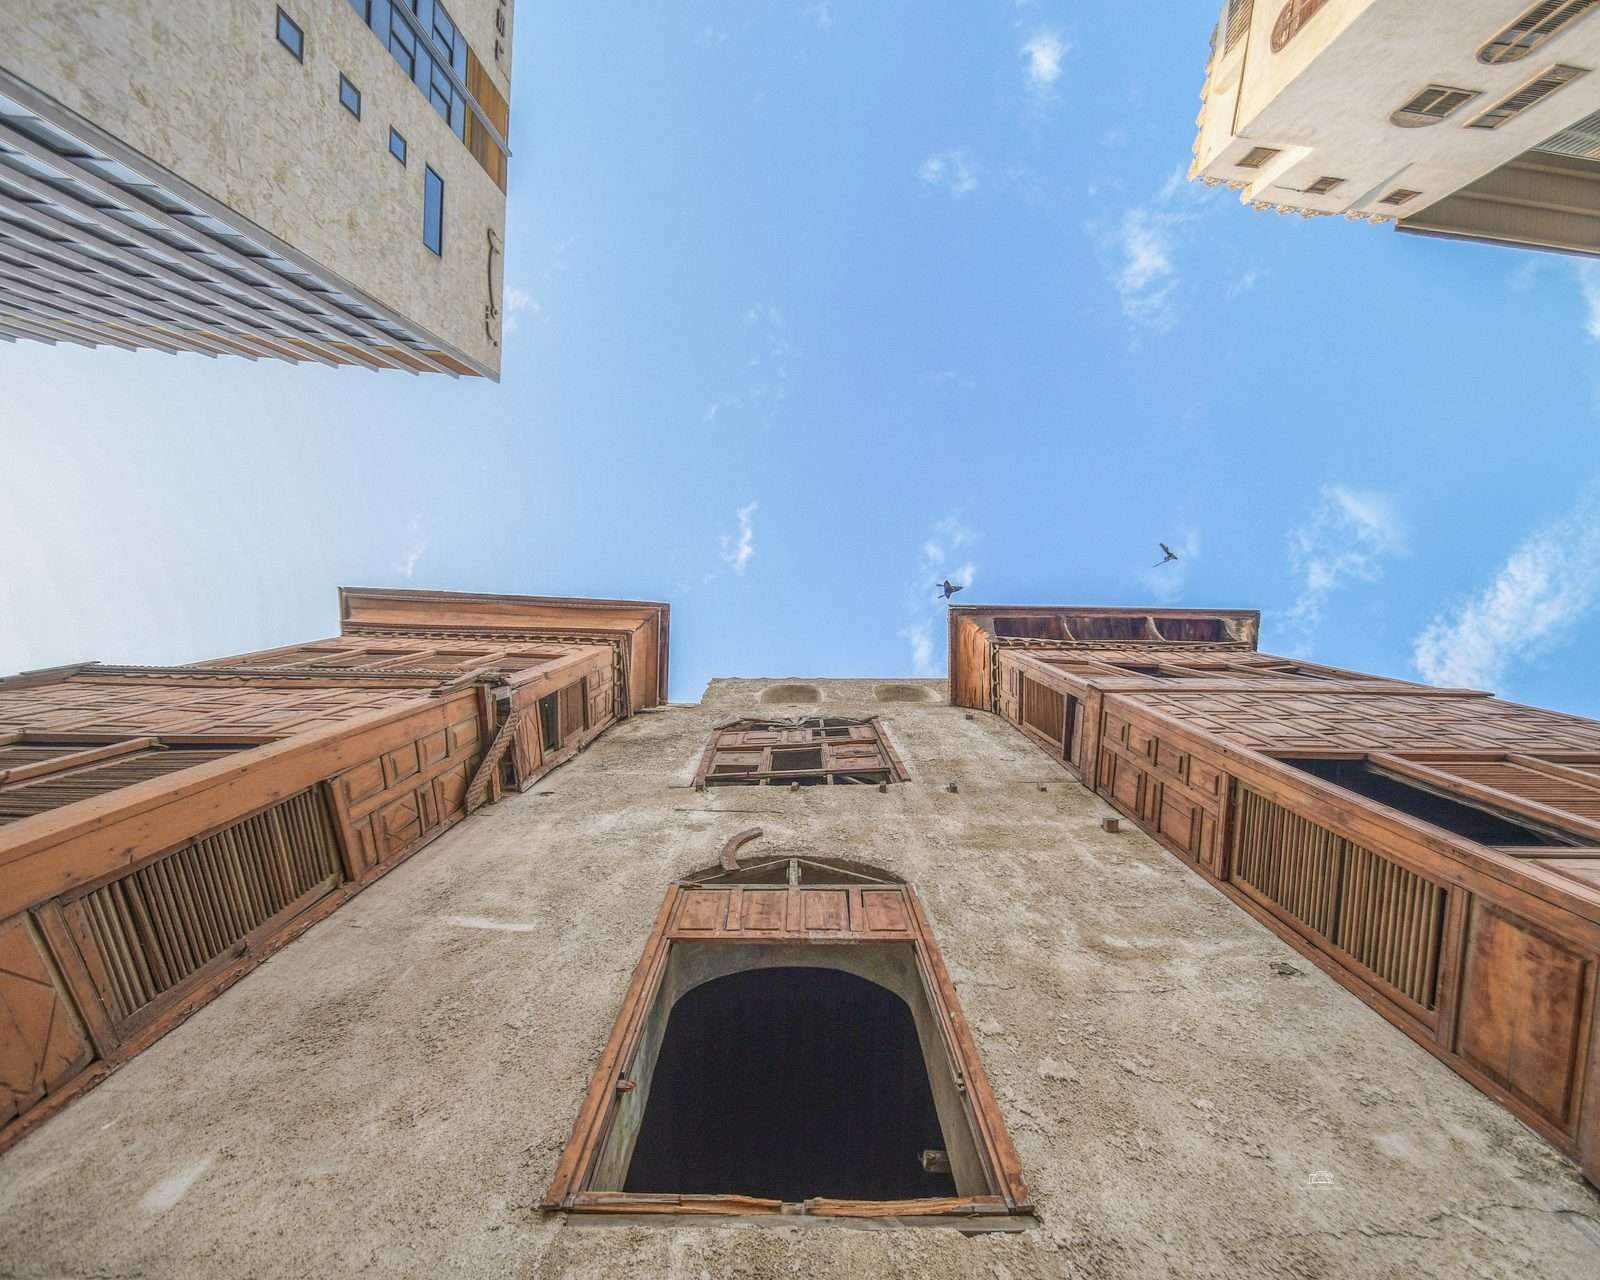 Worms Eyeview application for architectural photography